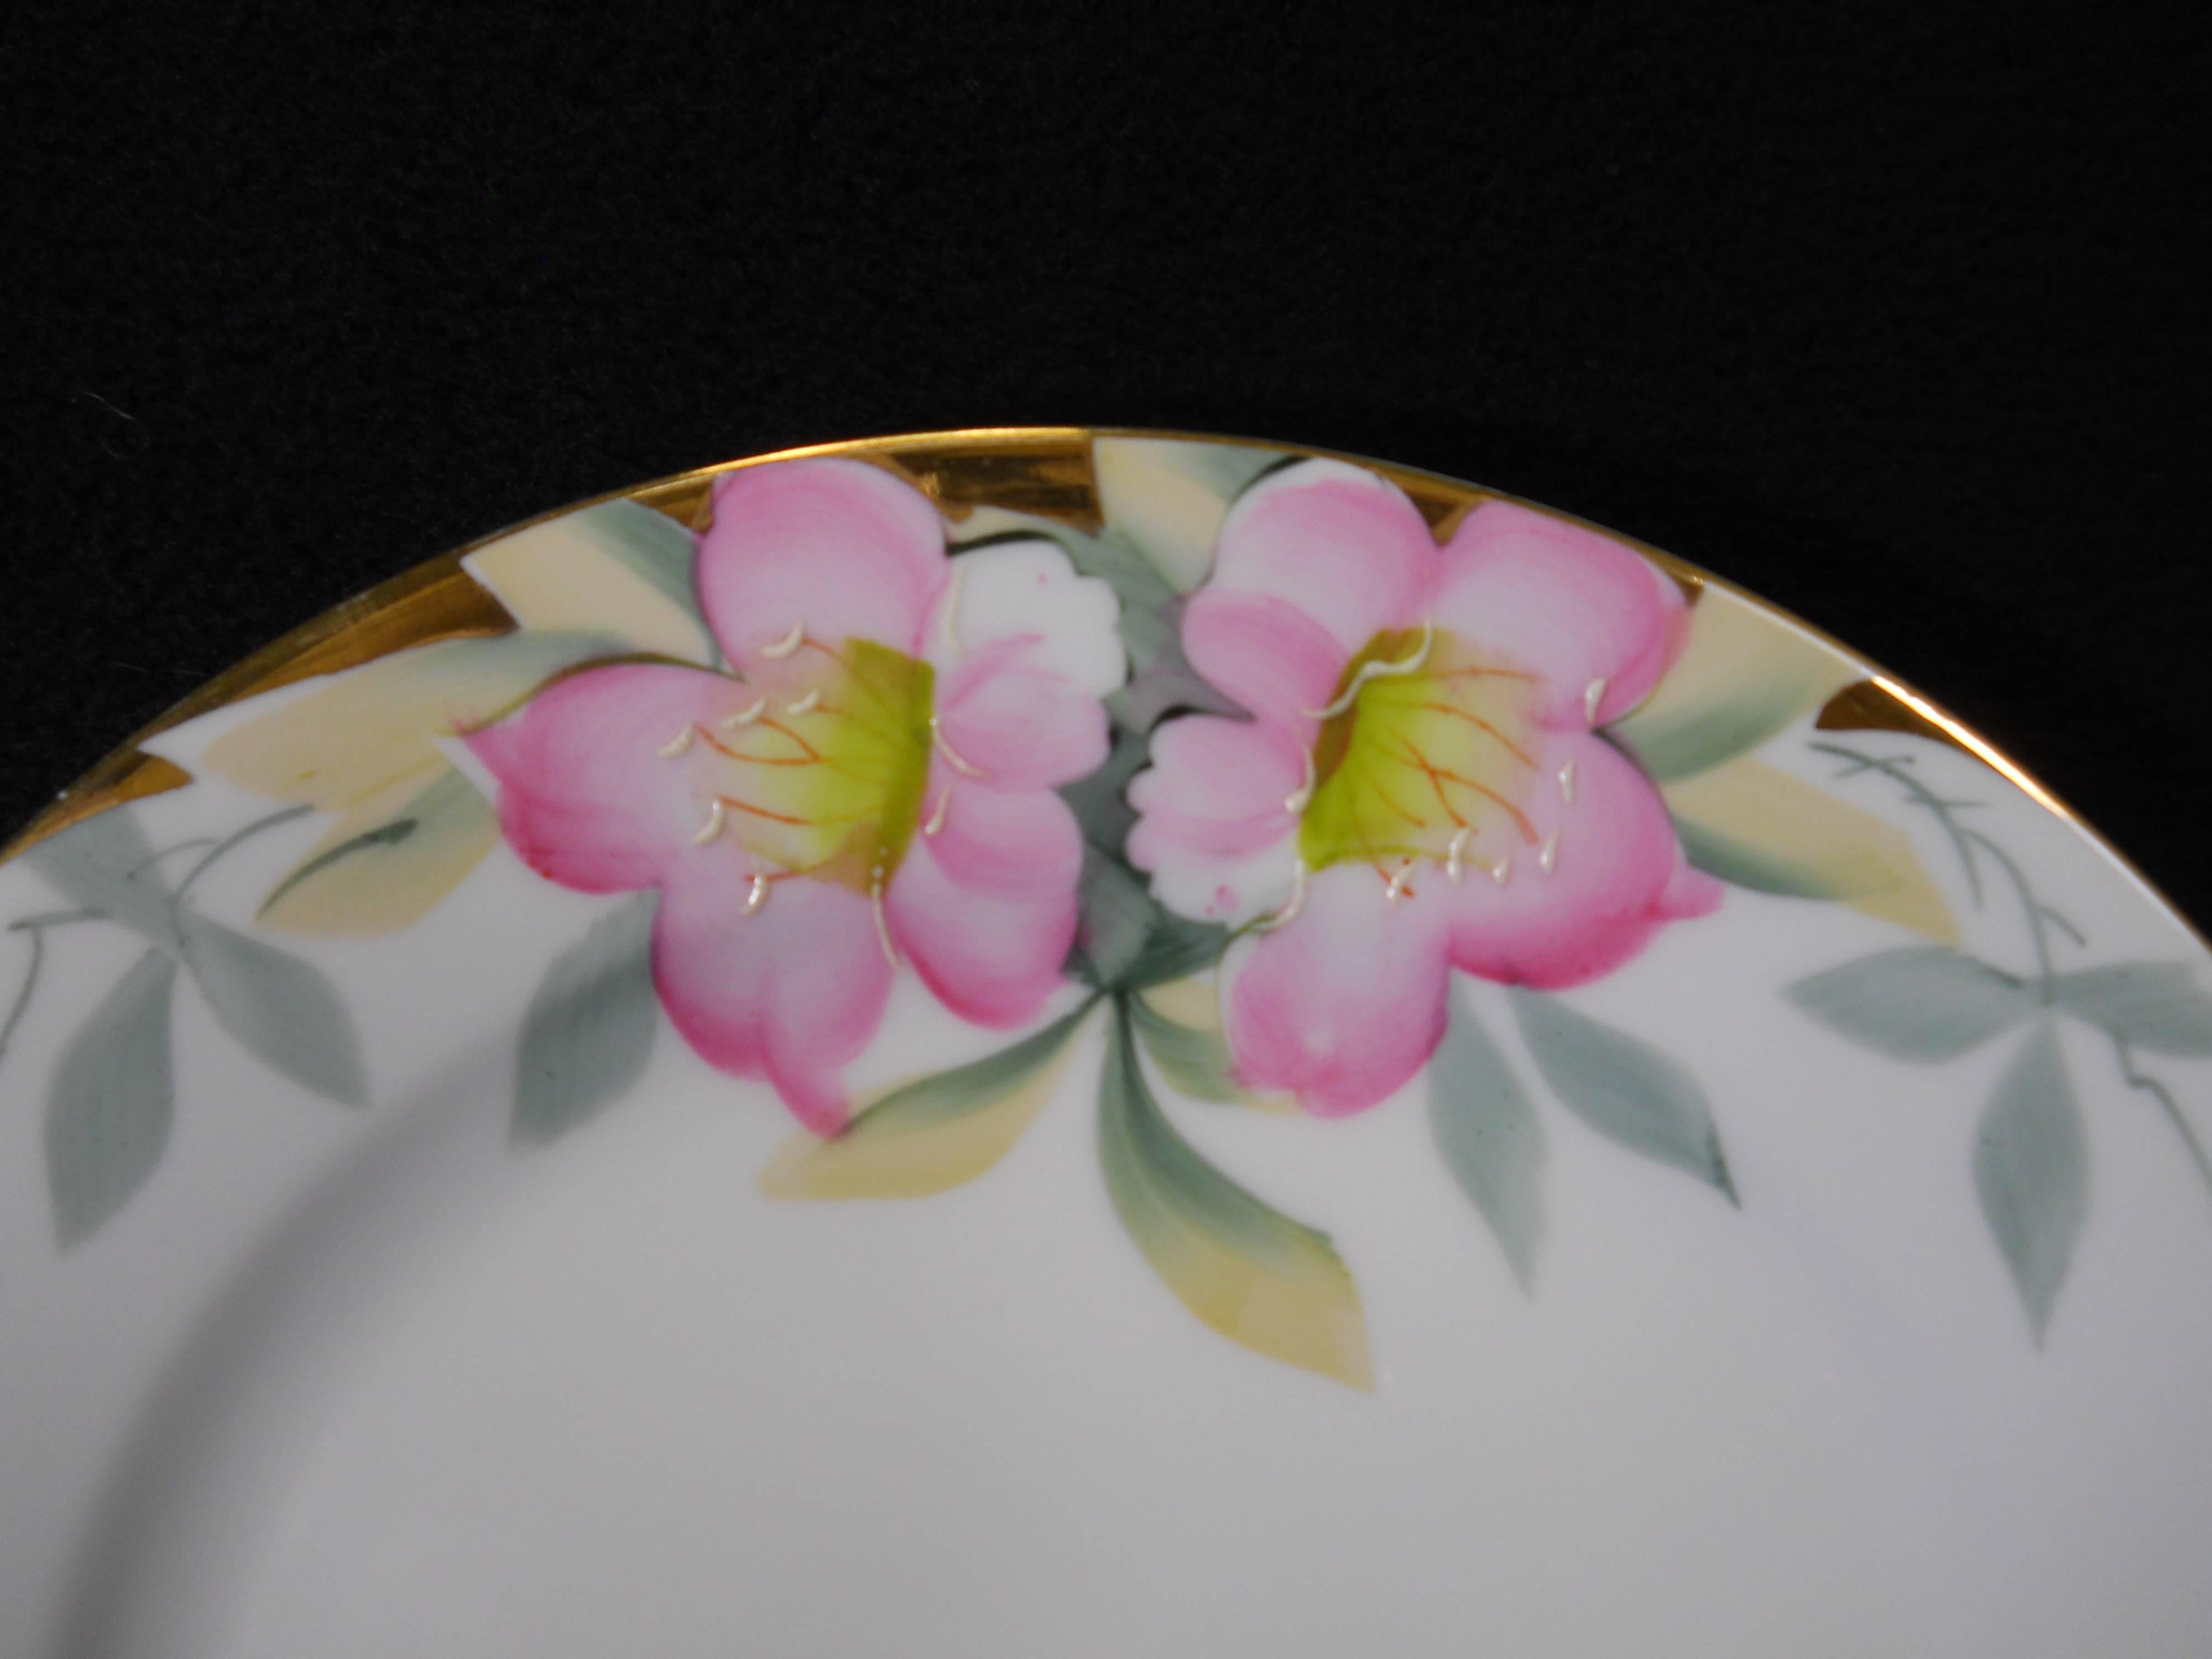 Porcelain Noritake China Azalea Pattern Hand-Painted Service for 12 Plue Serving